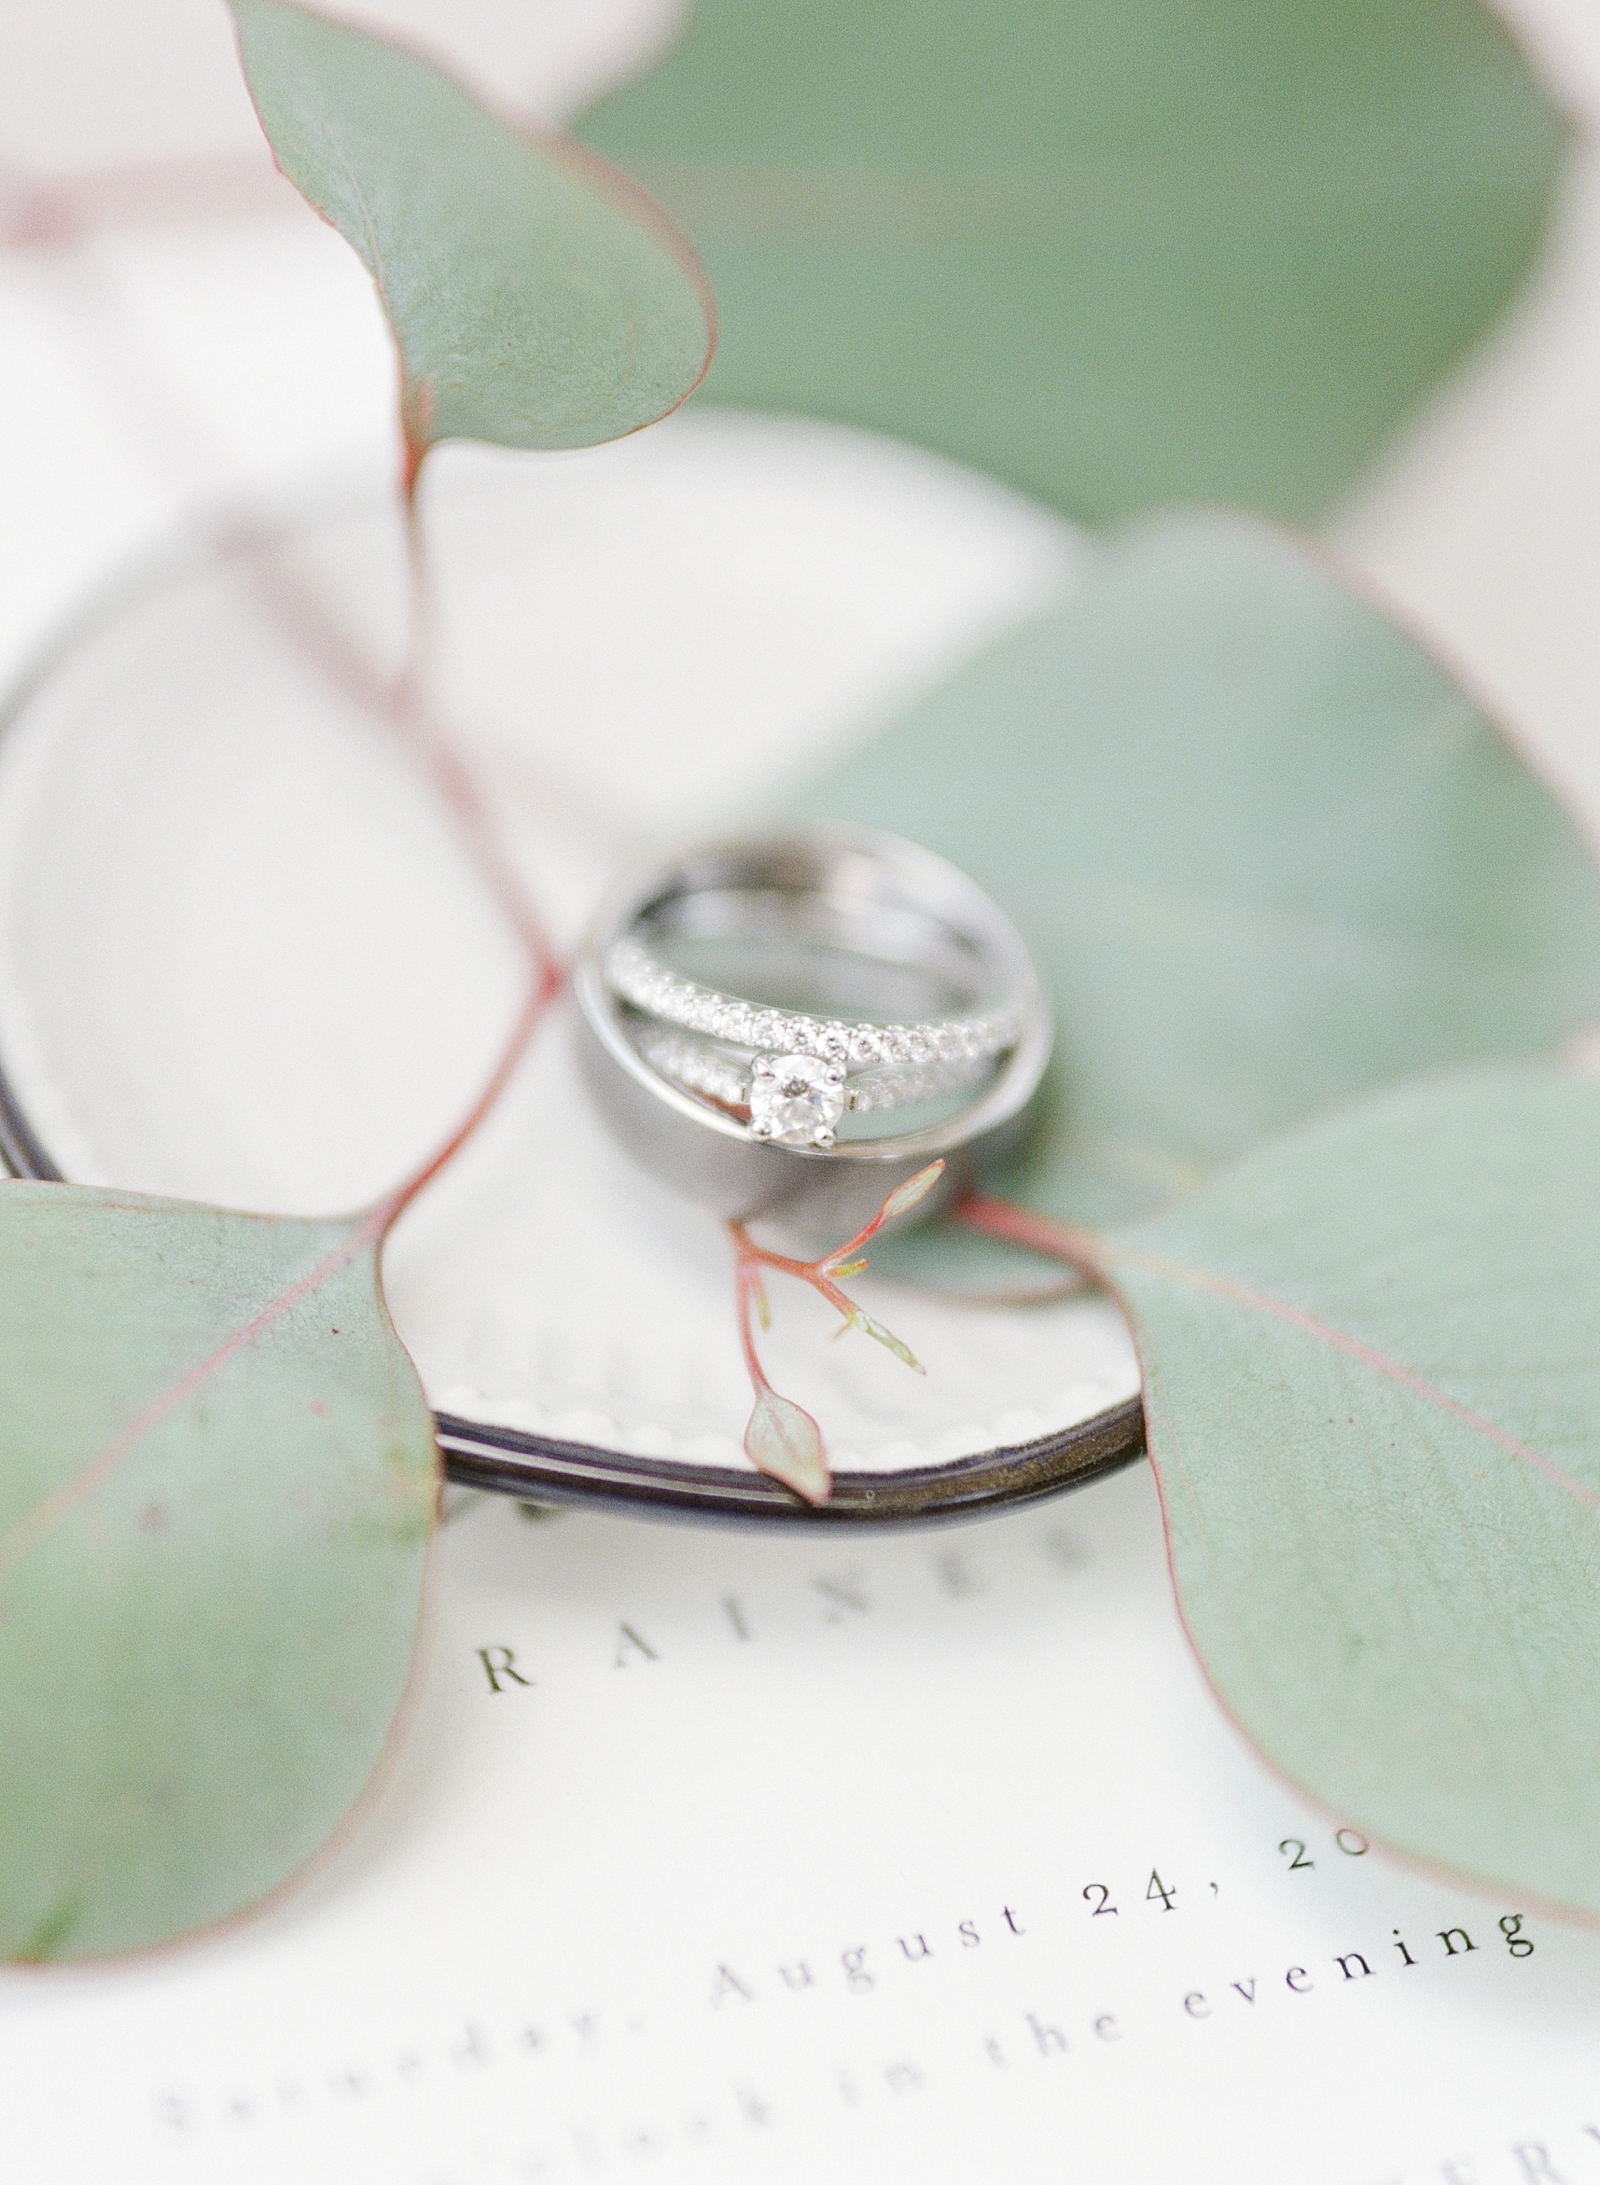 Glover Park Brewery Wedding Detail of Rings in Ring Dish on Invitation Photo